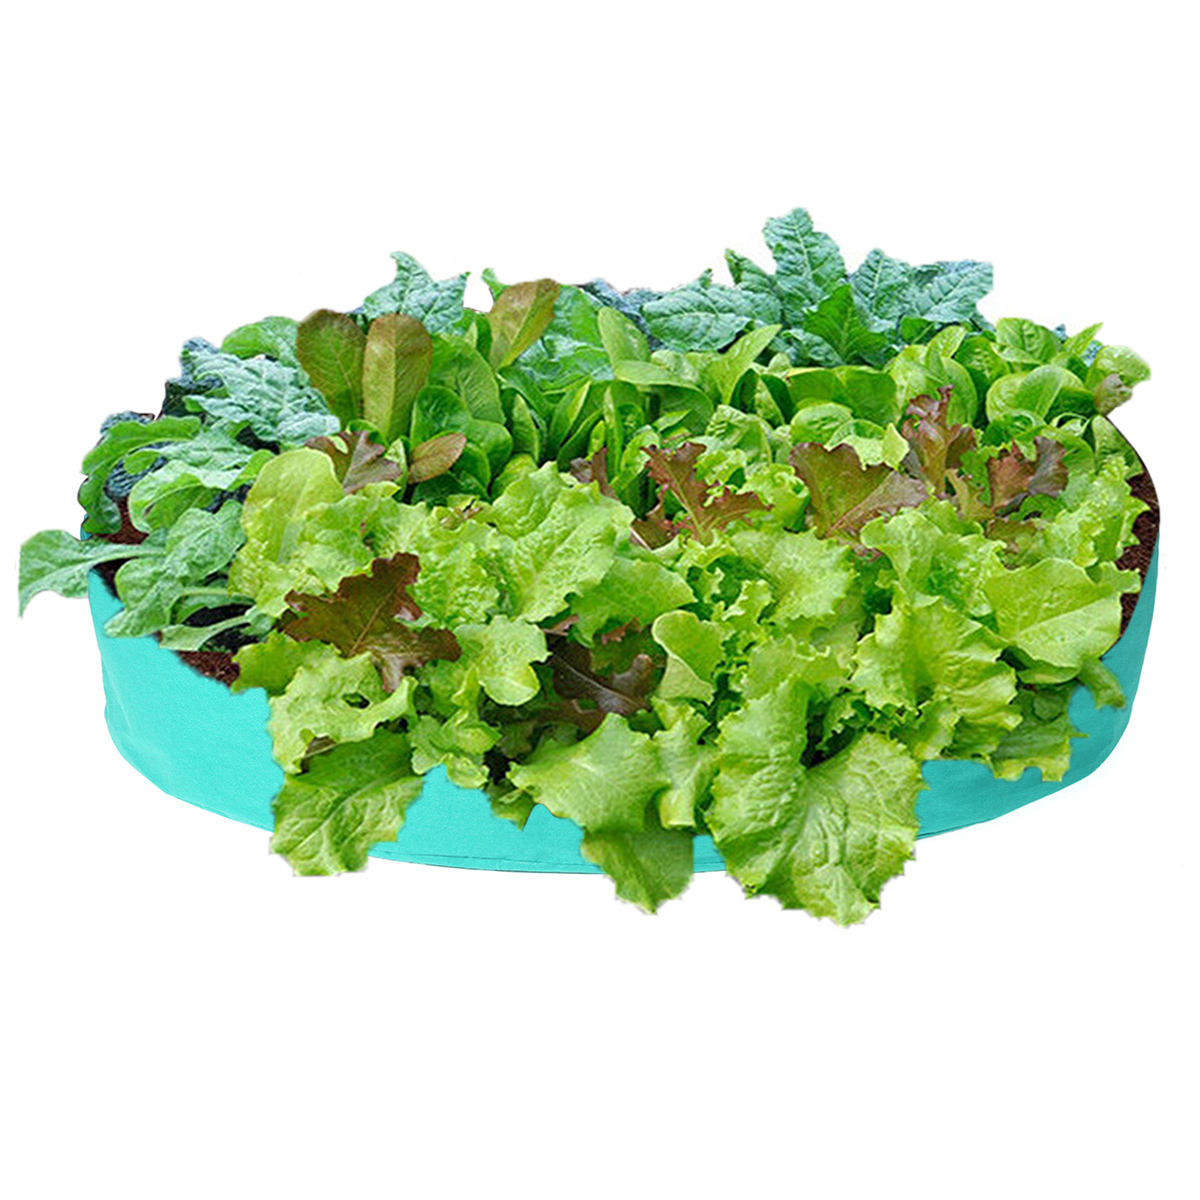 Foldable-Round-Planting-Container-Nursery-Flower-Planter-Vegetable-Flowers-Planting-Grow-Bag-1753373-6